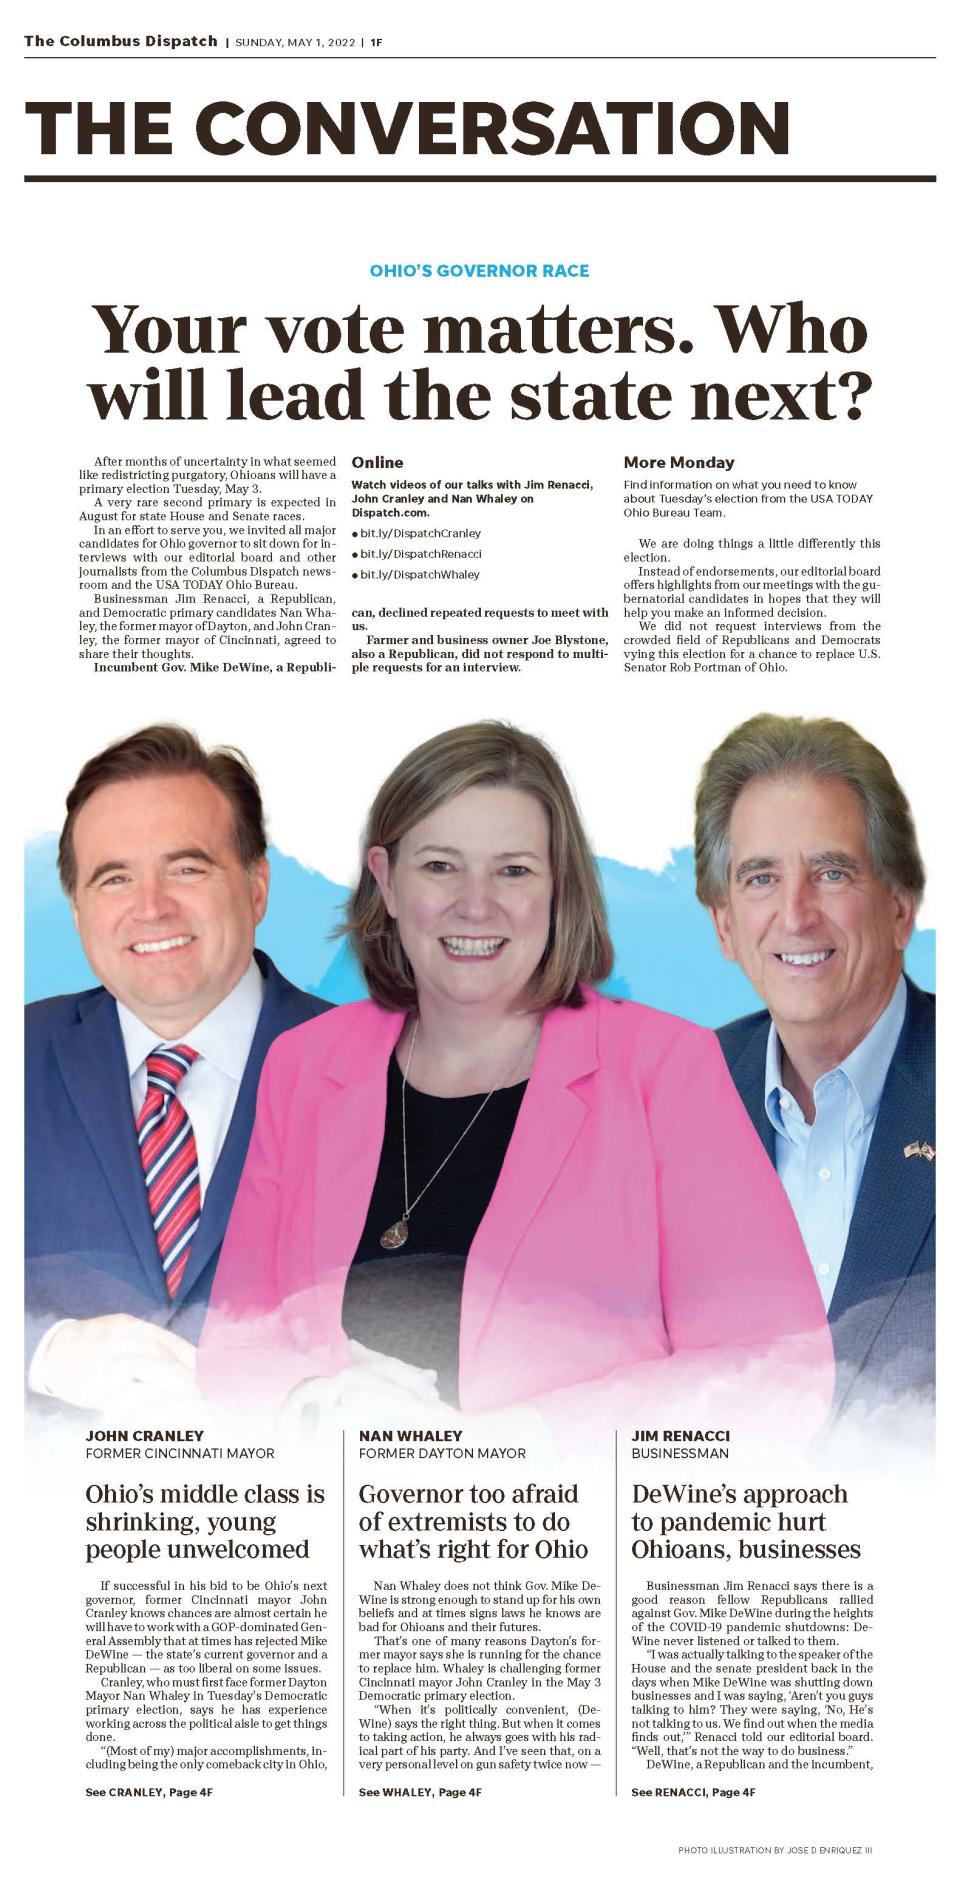 The May 1 2022 cover of the Columbus Dispatch's Conversation section